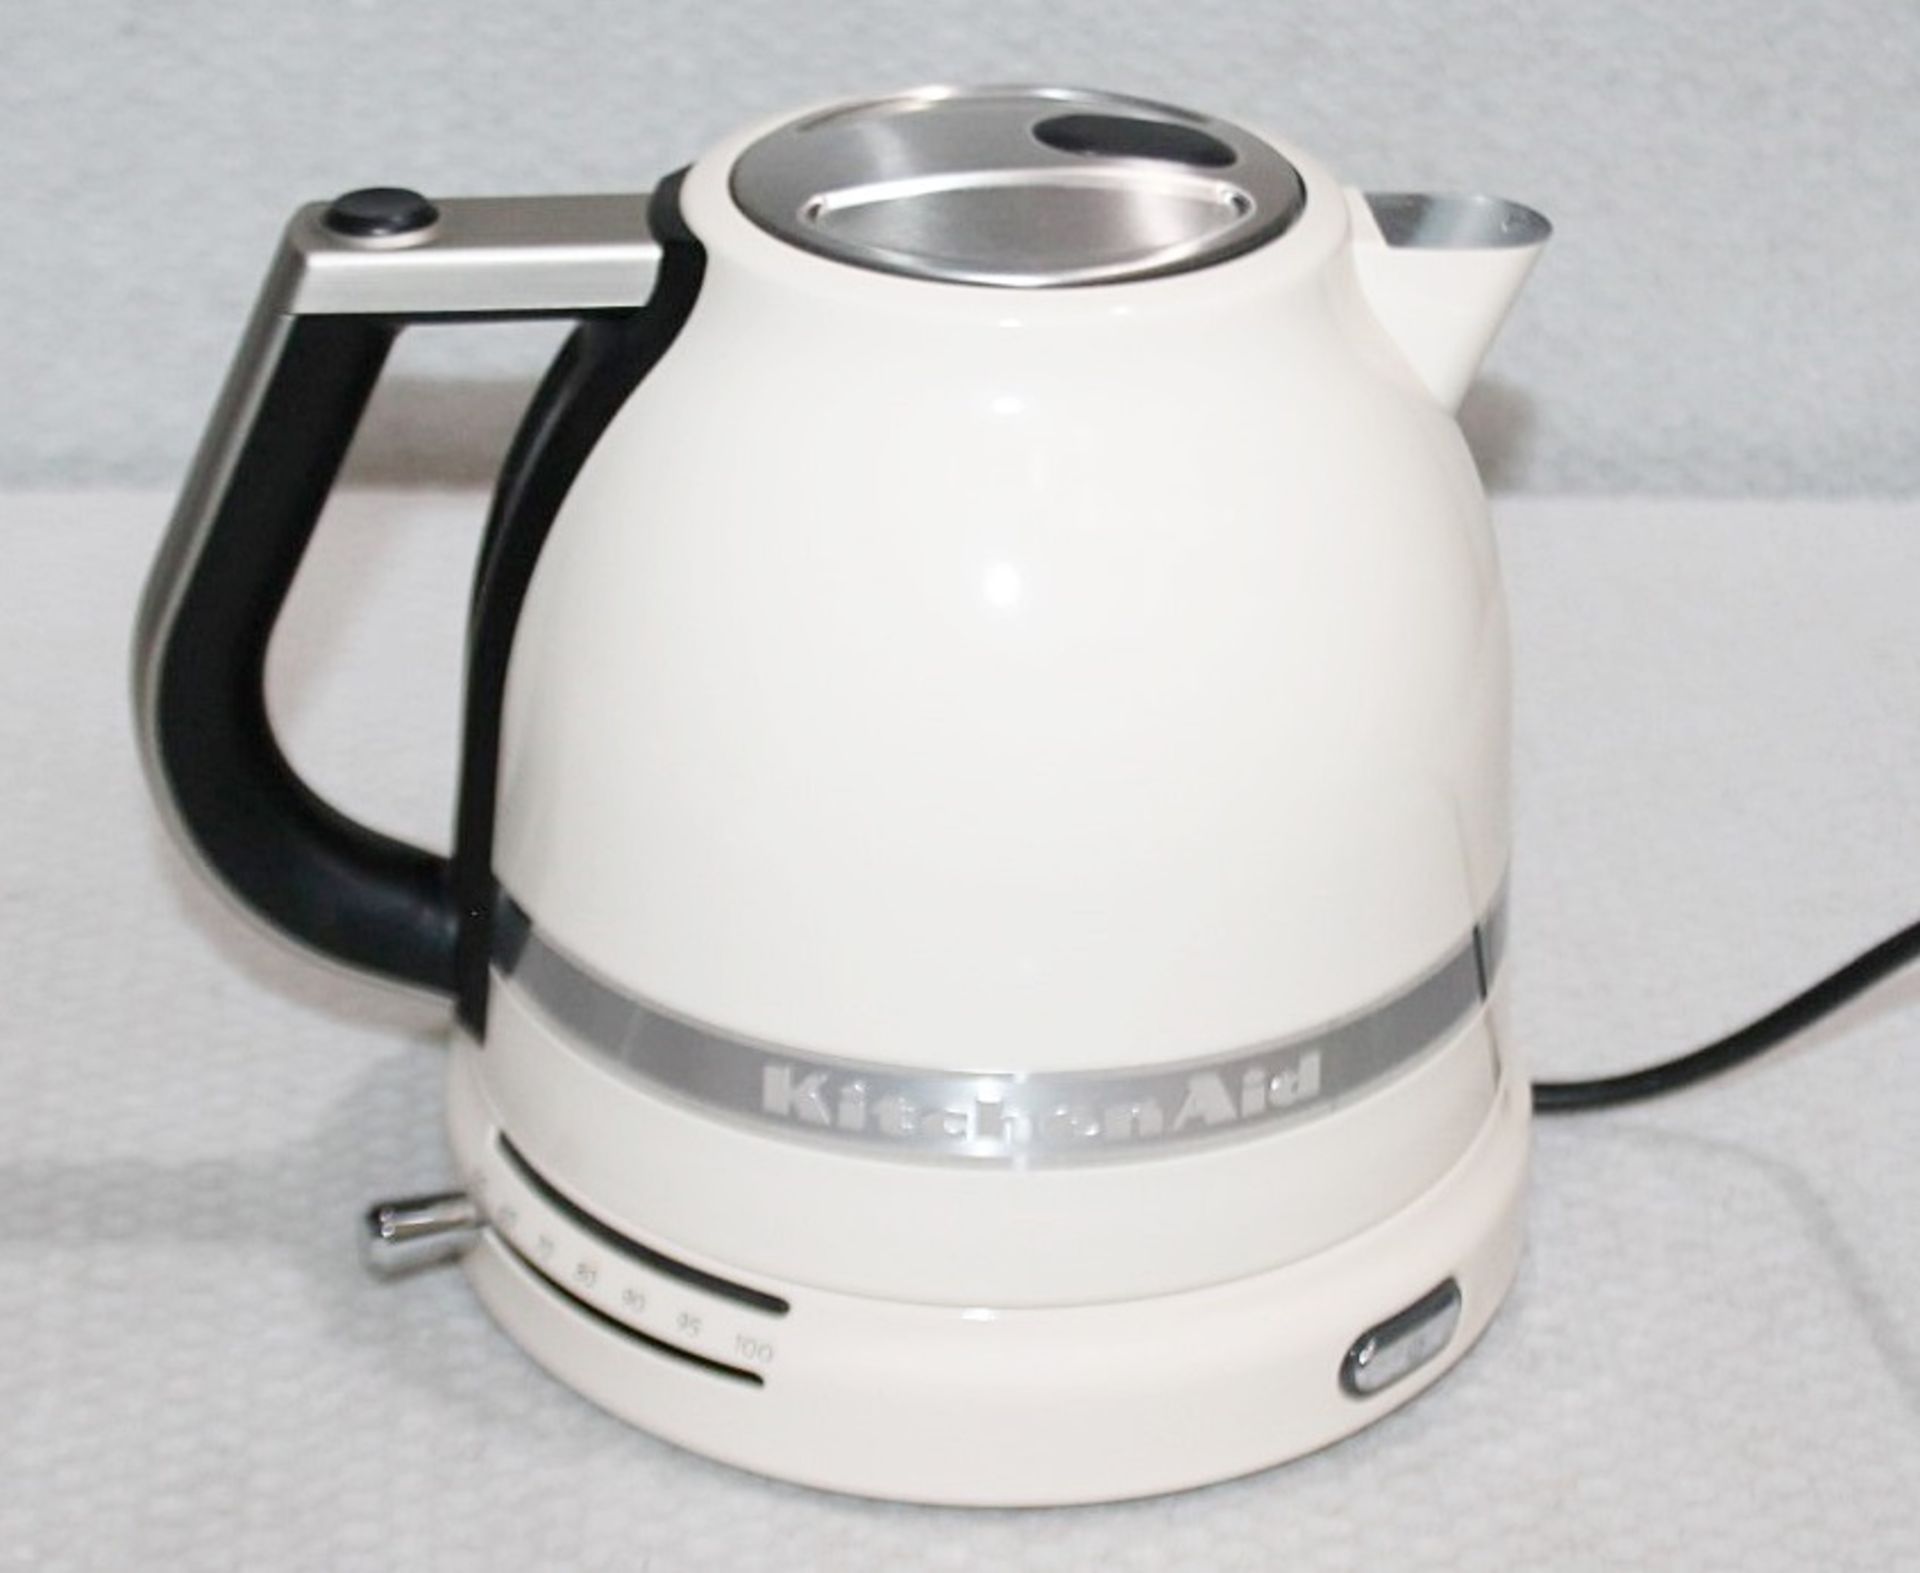 1 x KITCHENAID Artisan Dual Wall Kettle In A Pale Cream - Capacity 1.5L - Original Price £179.99 - - Image 11 of 11